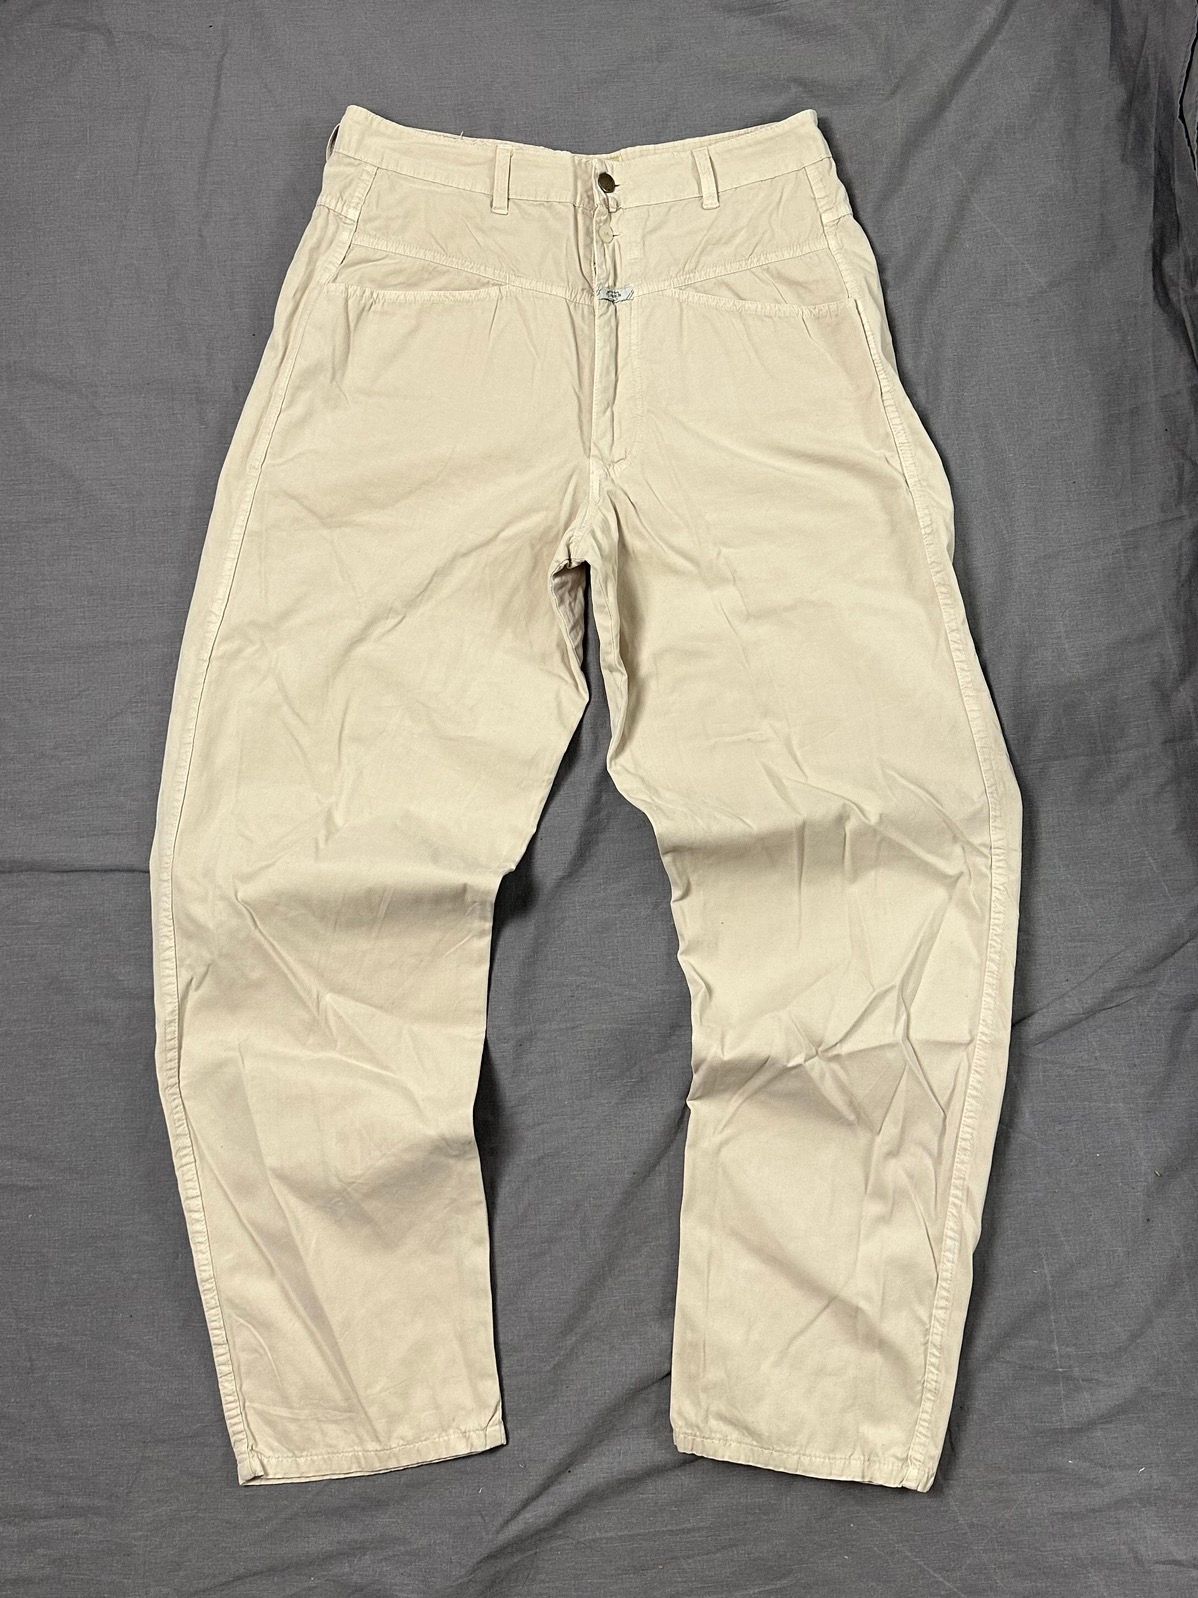 Pre-owned Marithe Francois Girbaud X Vintage Marithe Francois Girbaud Vintage Closed Pants In Beige